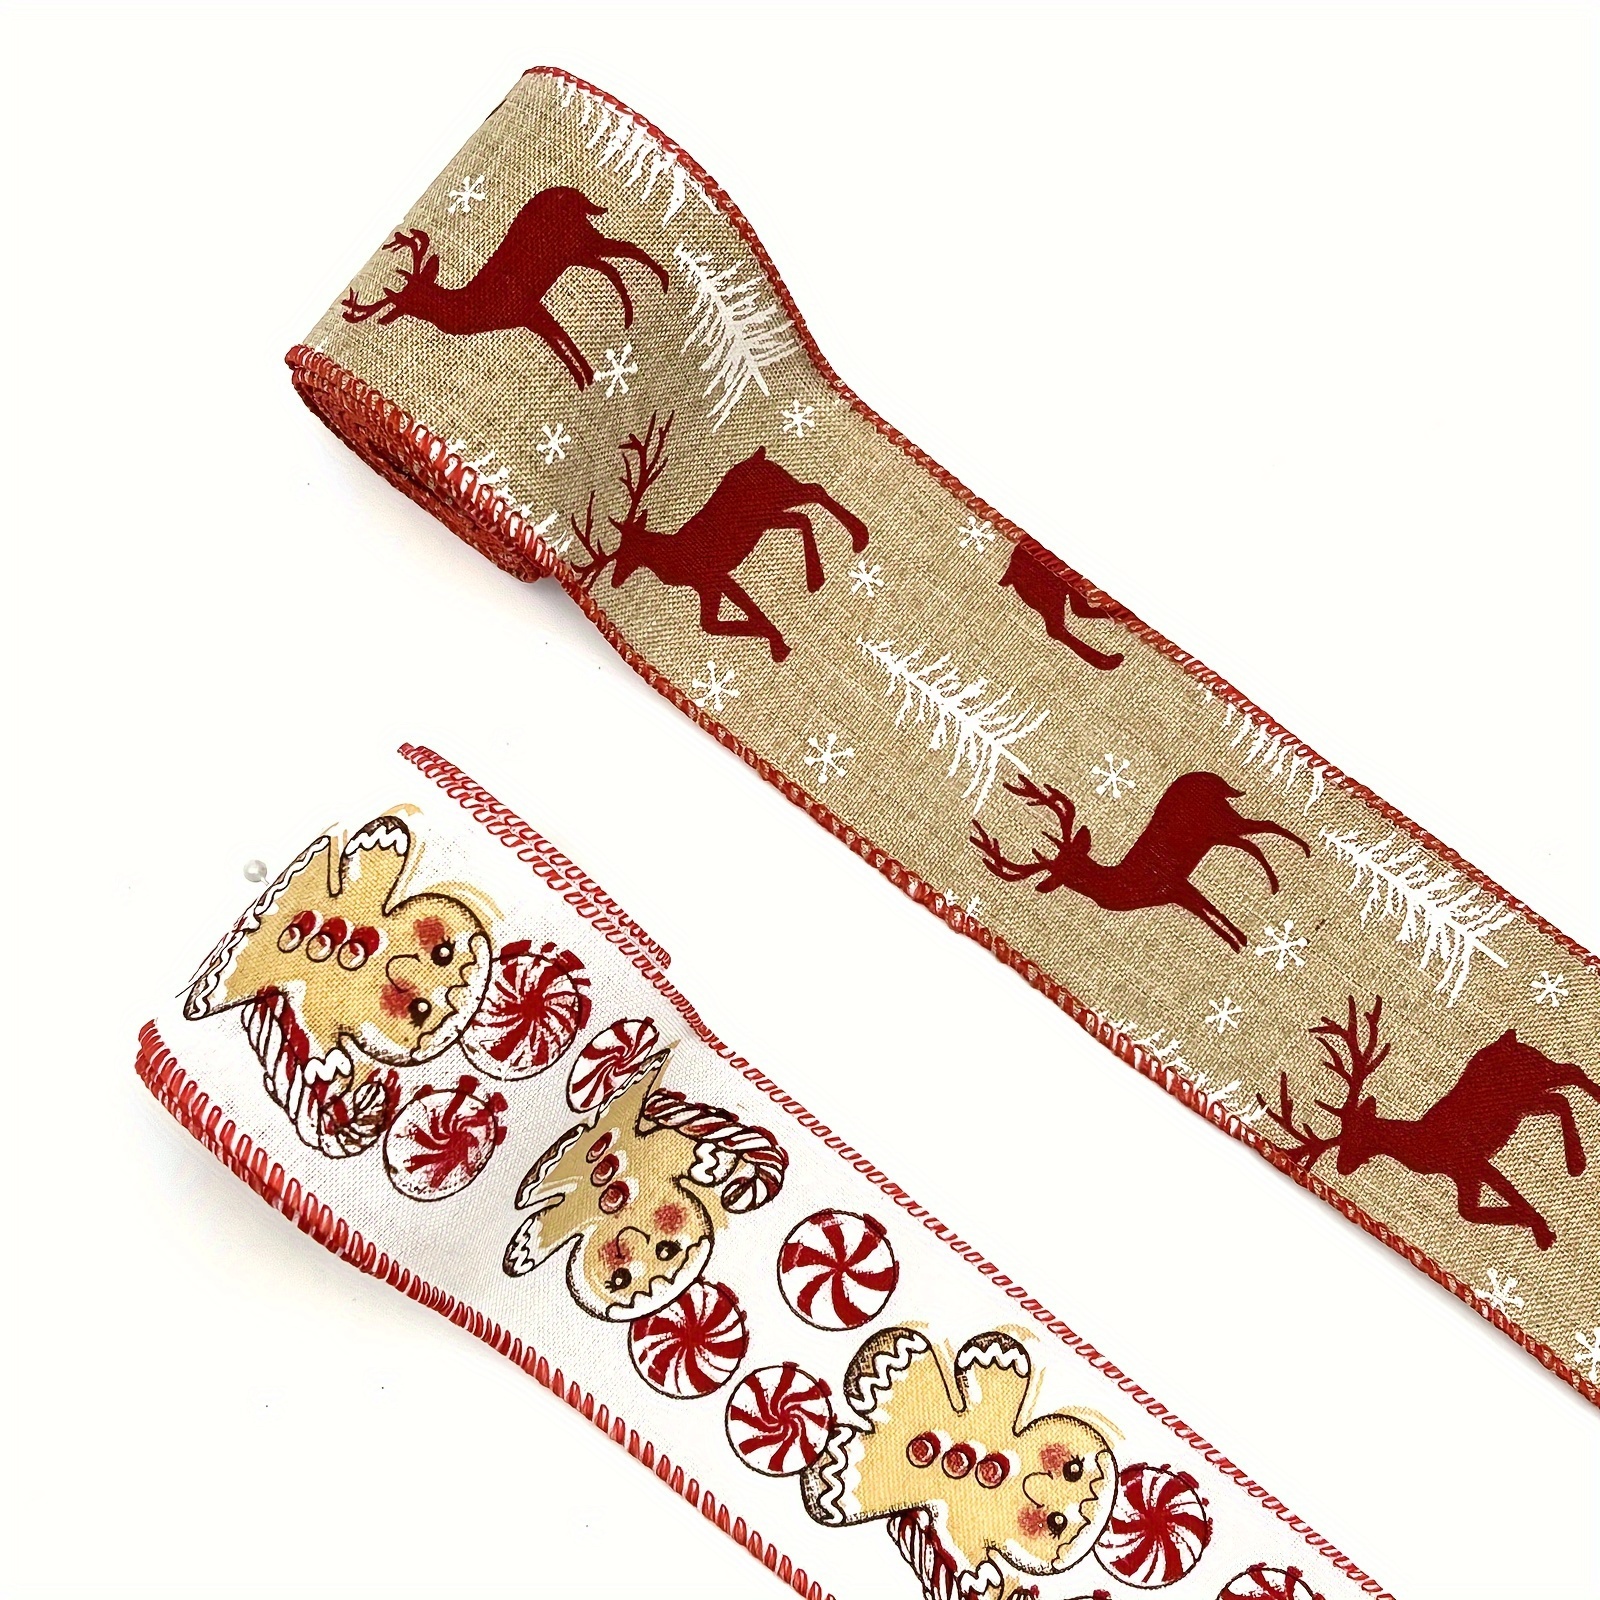 

5 Yards Golden Christmas Wired Ribbon With Tree, Elk & Snowflake Design - Perfect For Diy Crafts, Gift Wrapping, Wedding - Durable Burlap & Iron Wire Material